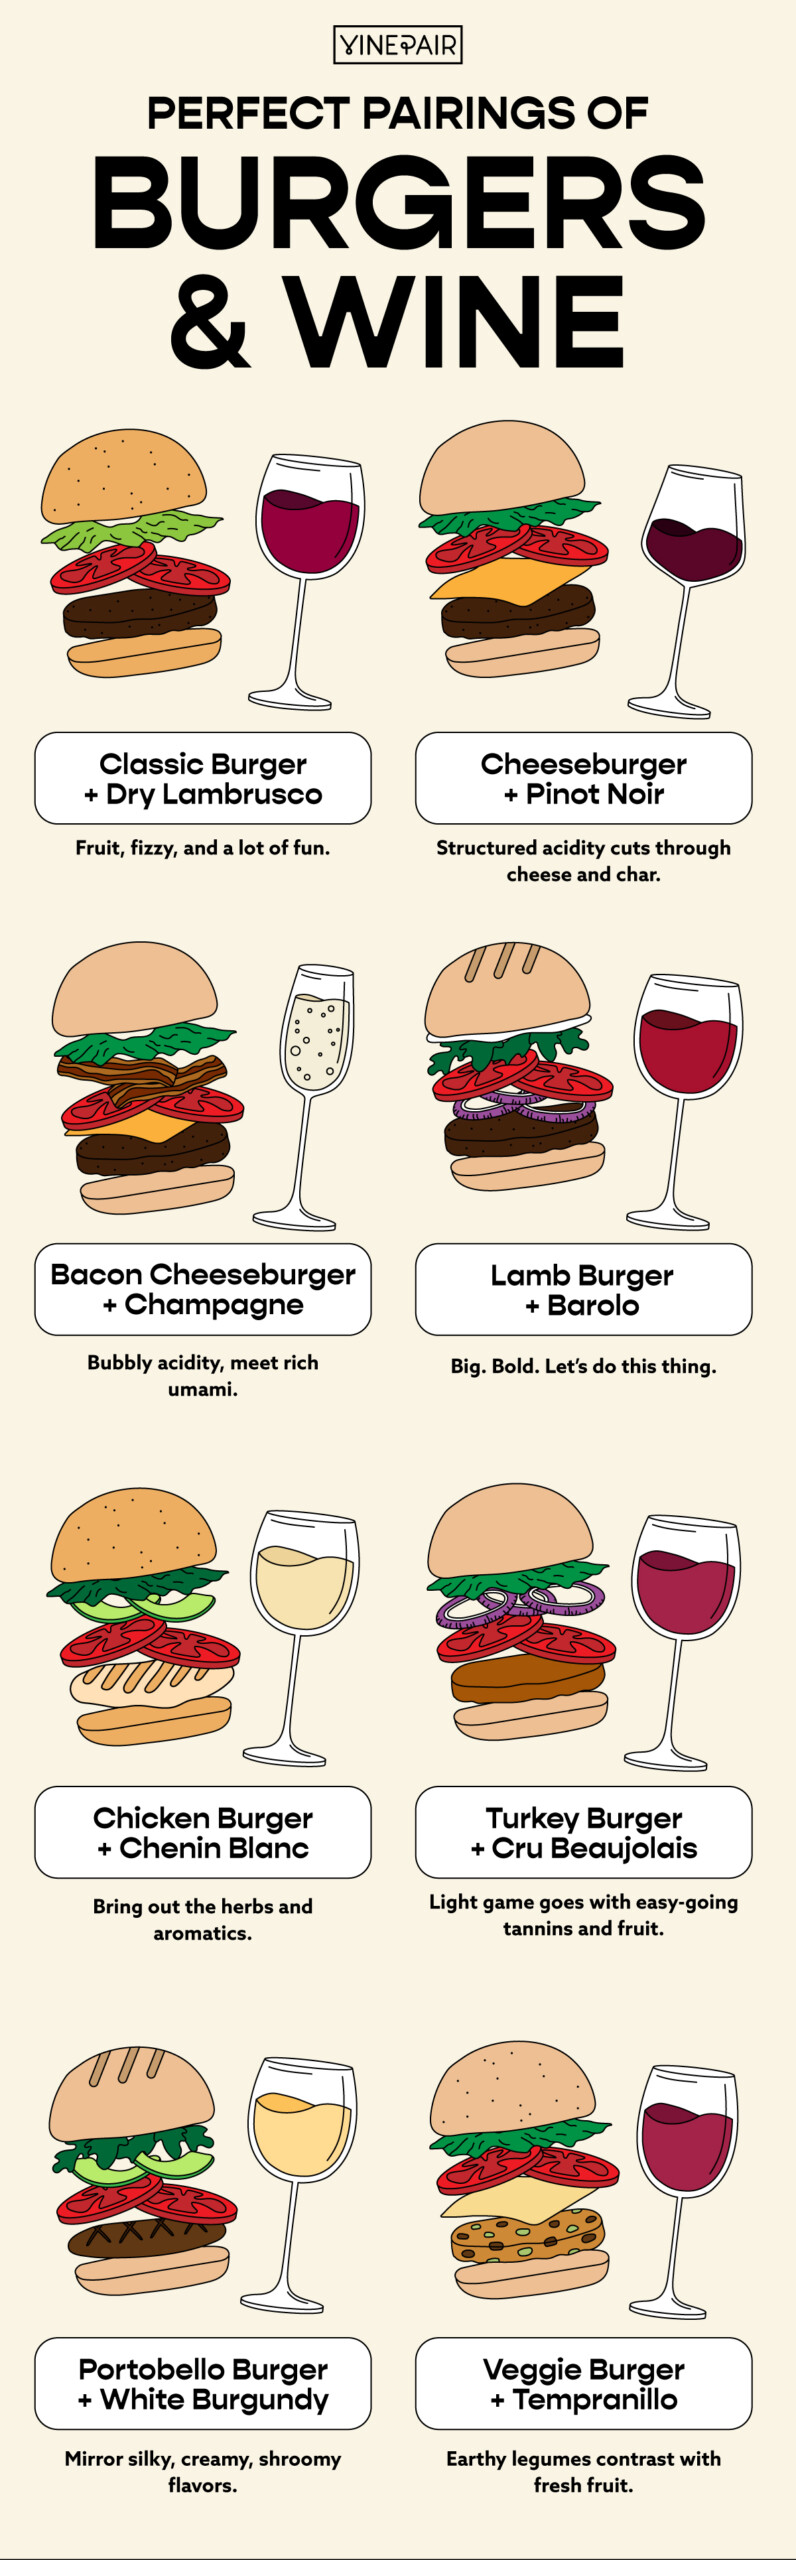 These are the best burger and wine pairings